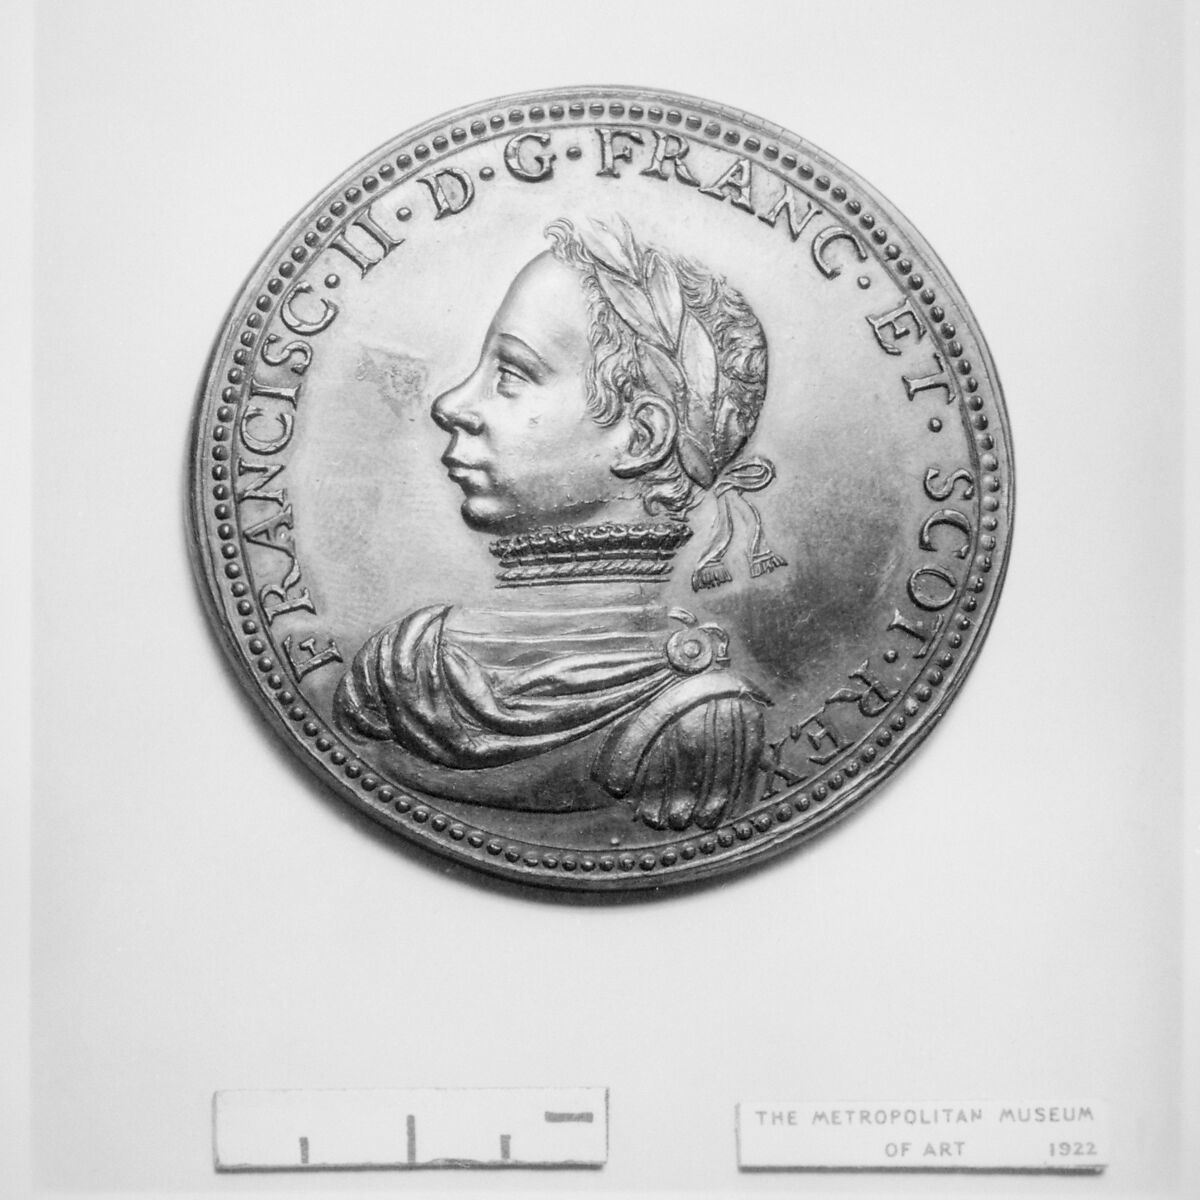 François II, King of France, King Consort of Scotland, After designs of 1559–60 by Etienne Delaune (French, Orléans 1518/19–1583 Strasbourg), Bronze, French, probably Paris 